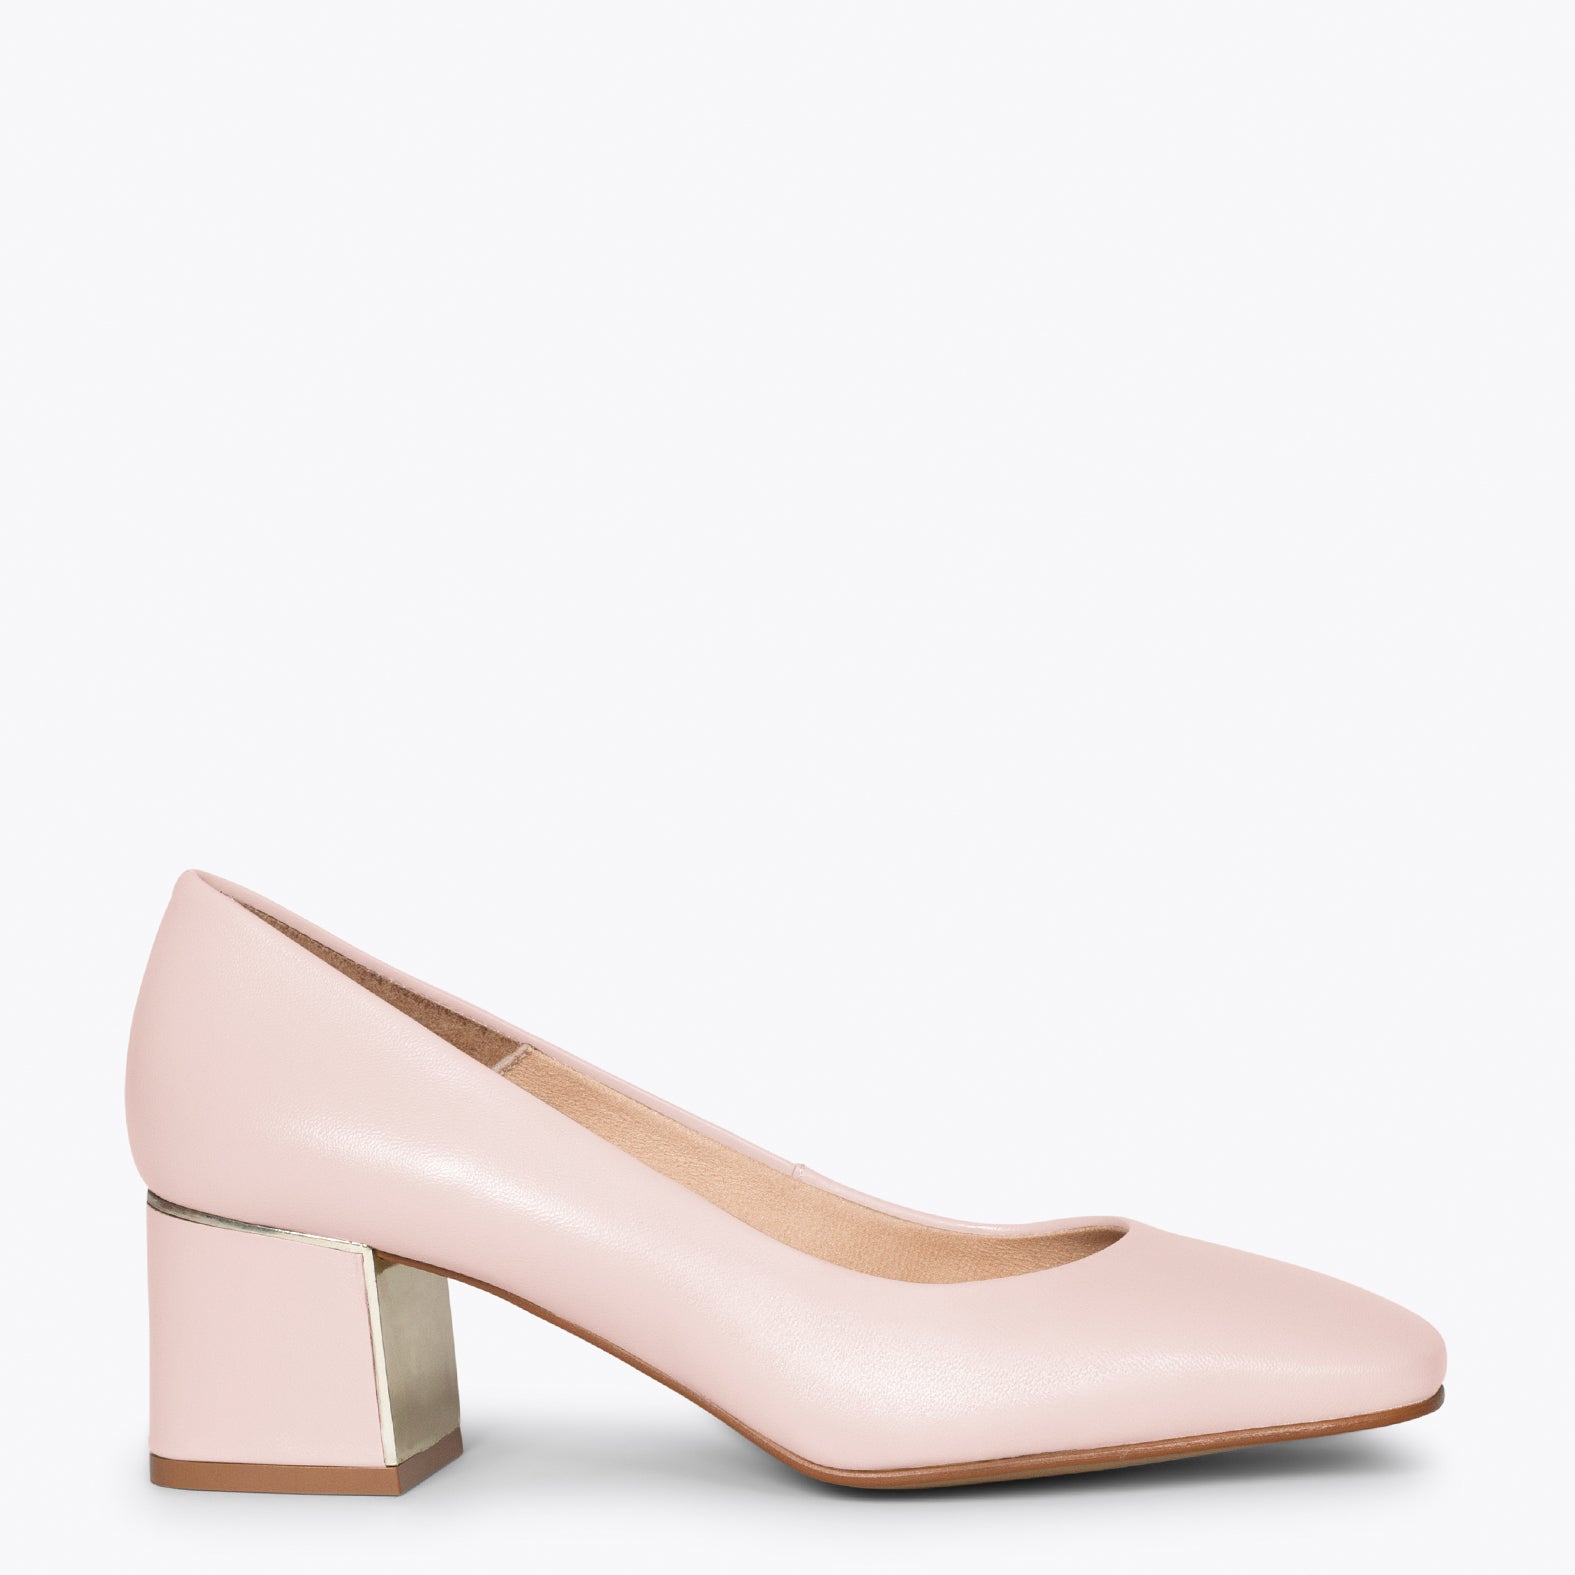 FEMME – NUDE mid heel shoes with square toe